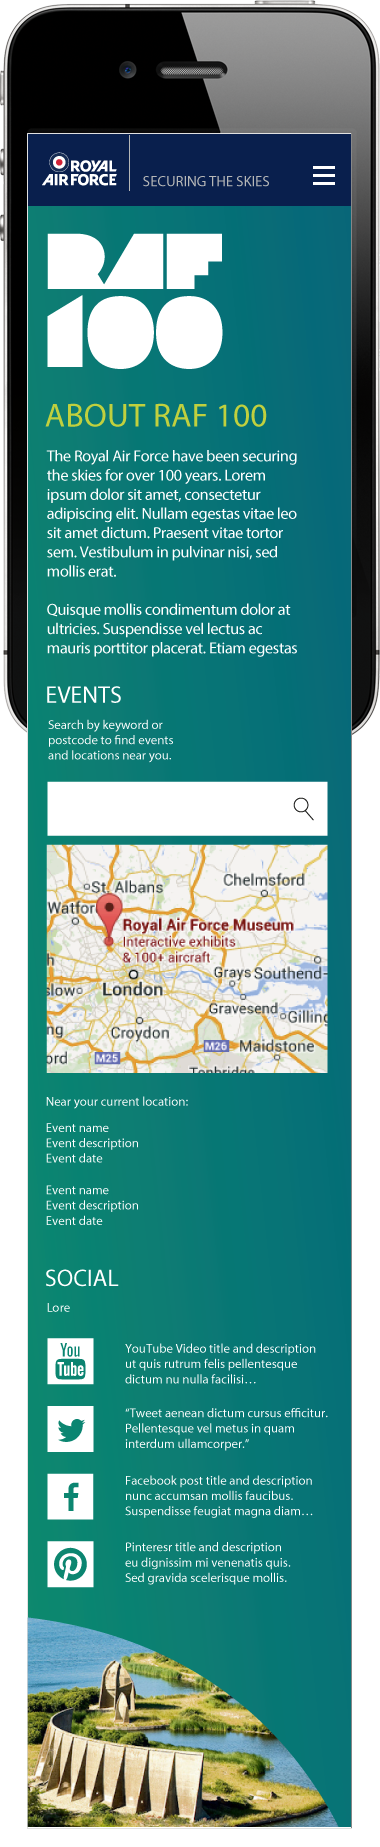 RAF 100 about page - mobile